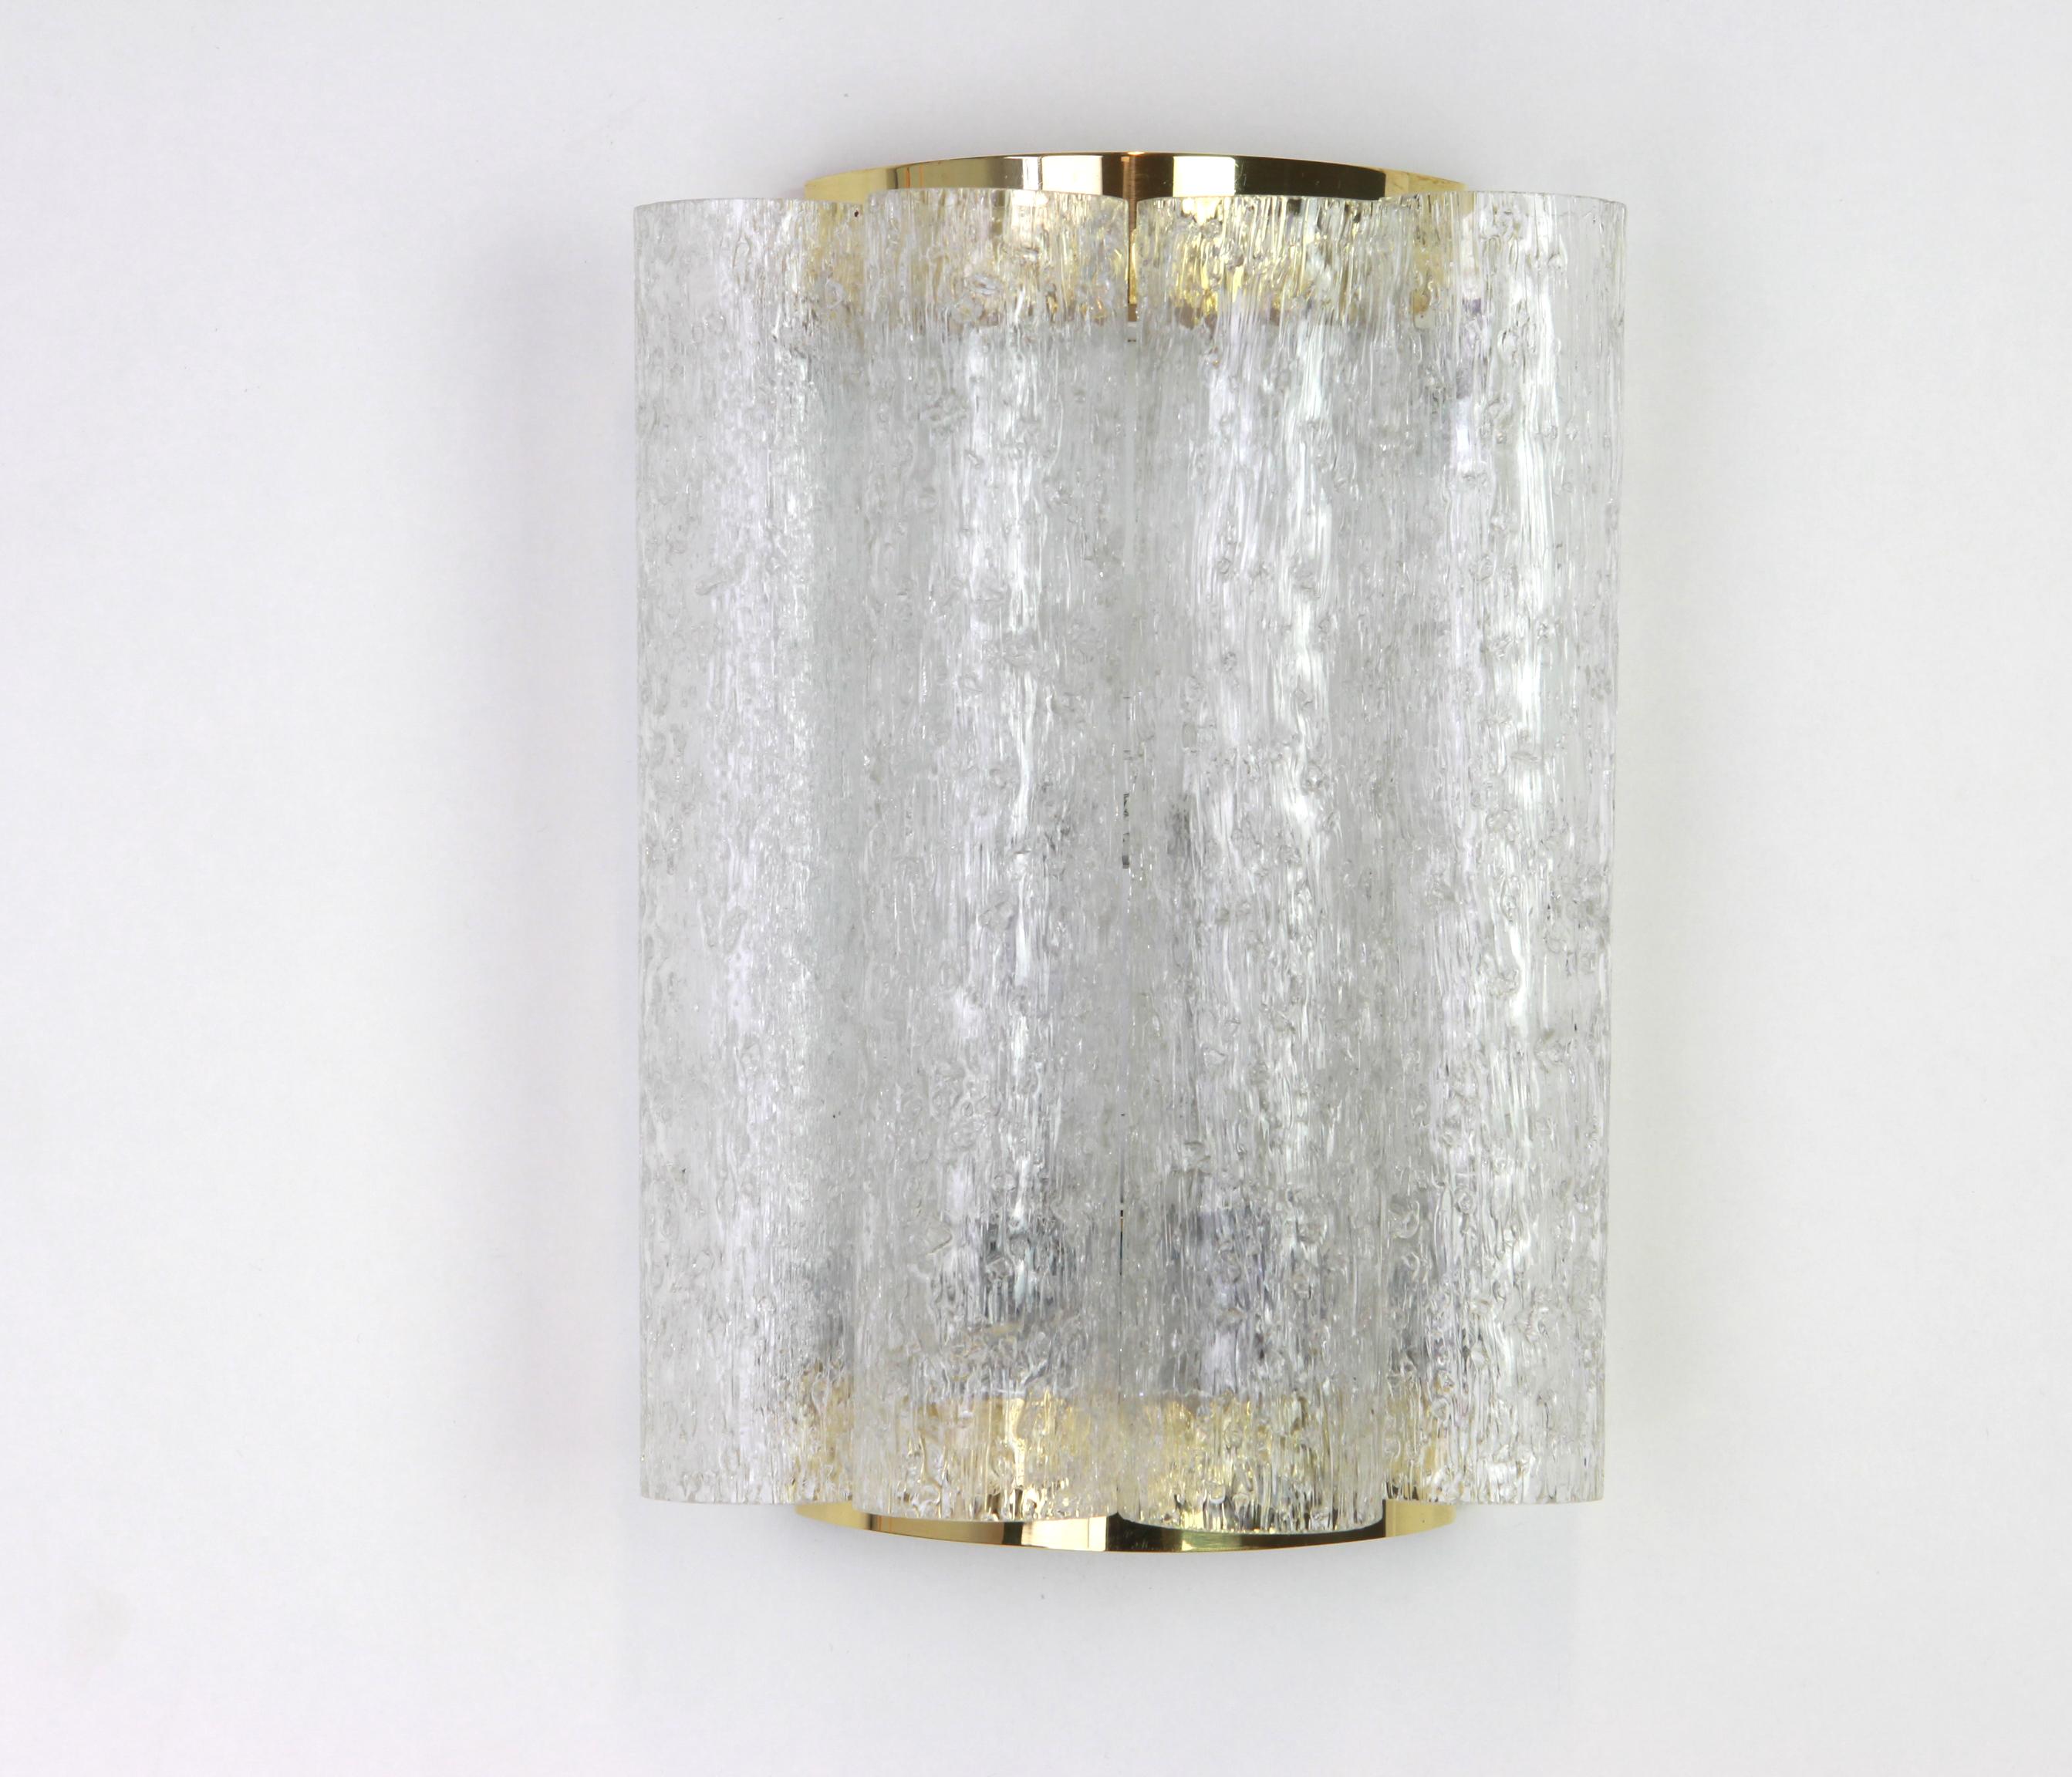 Wonderful pair of midcentury wall sconces with ice glass tubes, made by Doria Leuchten, Germany , manufactured, circa 1960-1969.
High quality and in very good condition. Cleaned, well-wired and ready to use.

Each sconce requires 1 x E14 Standard